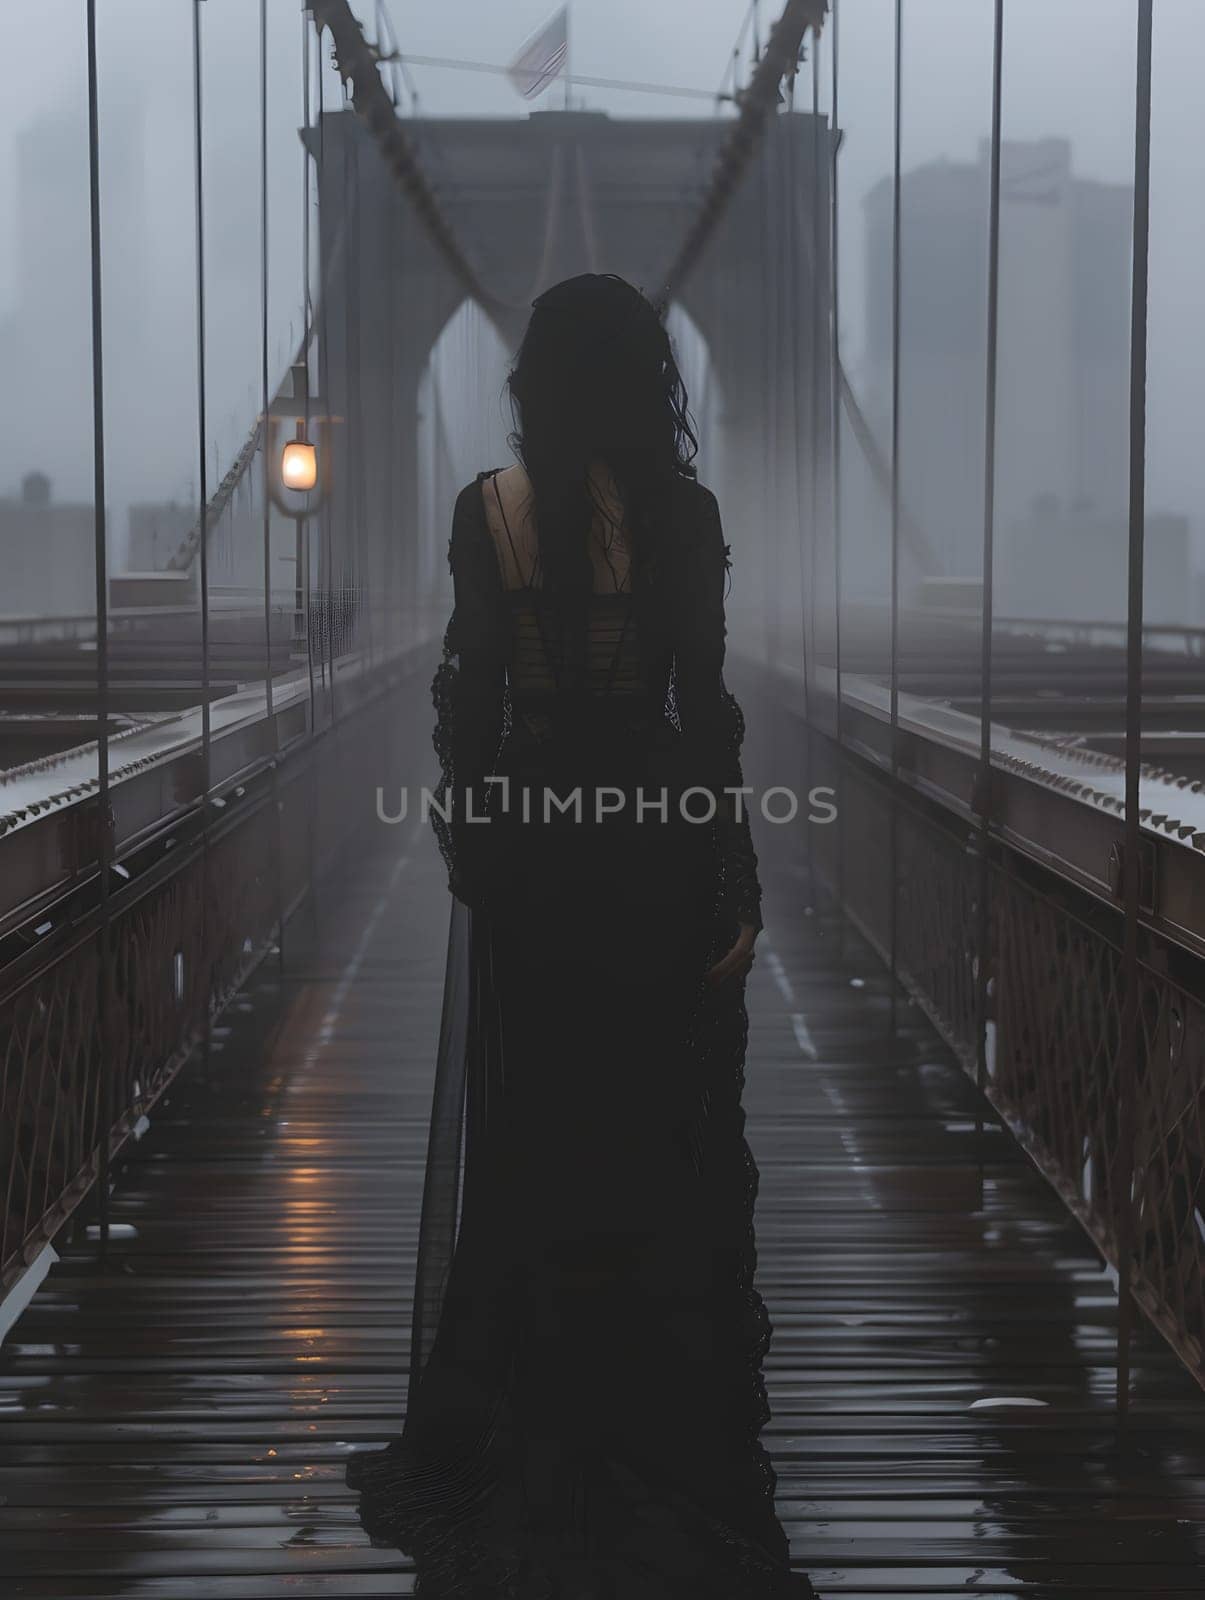 A woman in a long black dress is crossing a bridge in the rain, under a dark sky and surrounded by mist and haze. She walks along the metal track, with no public transport in sight